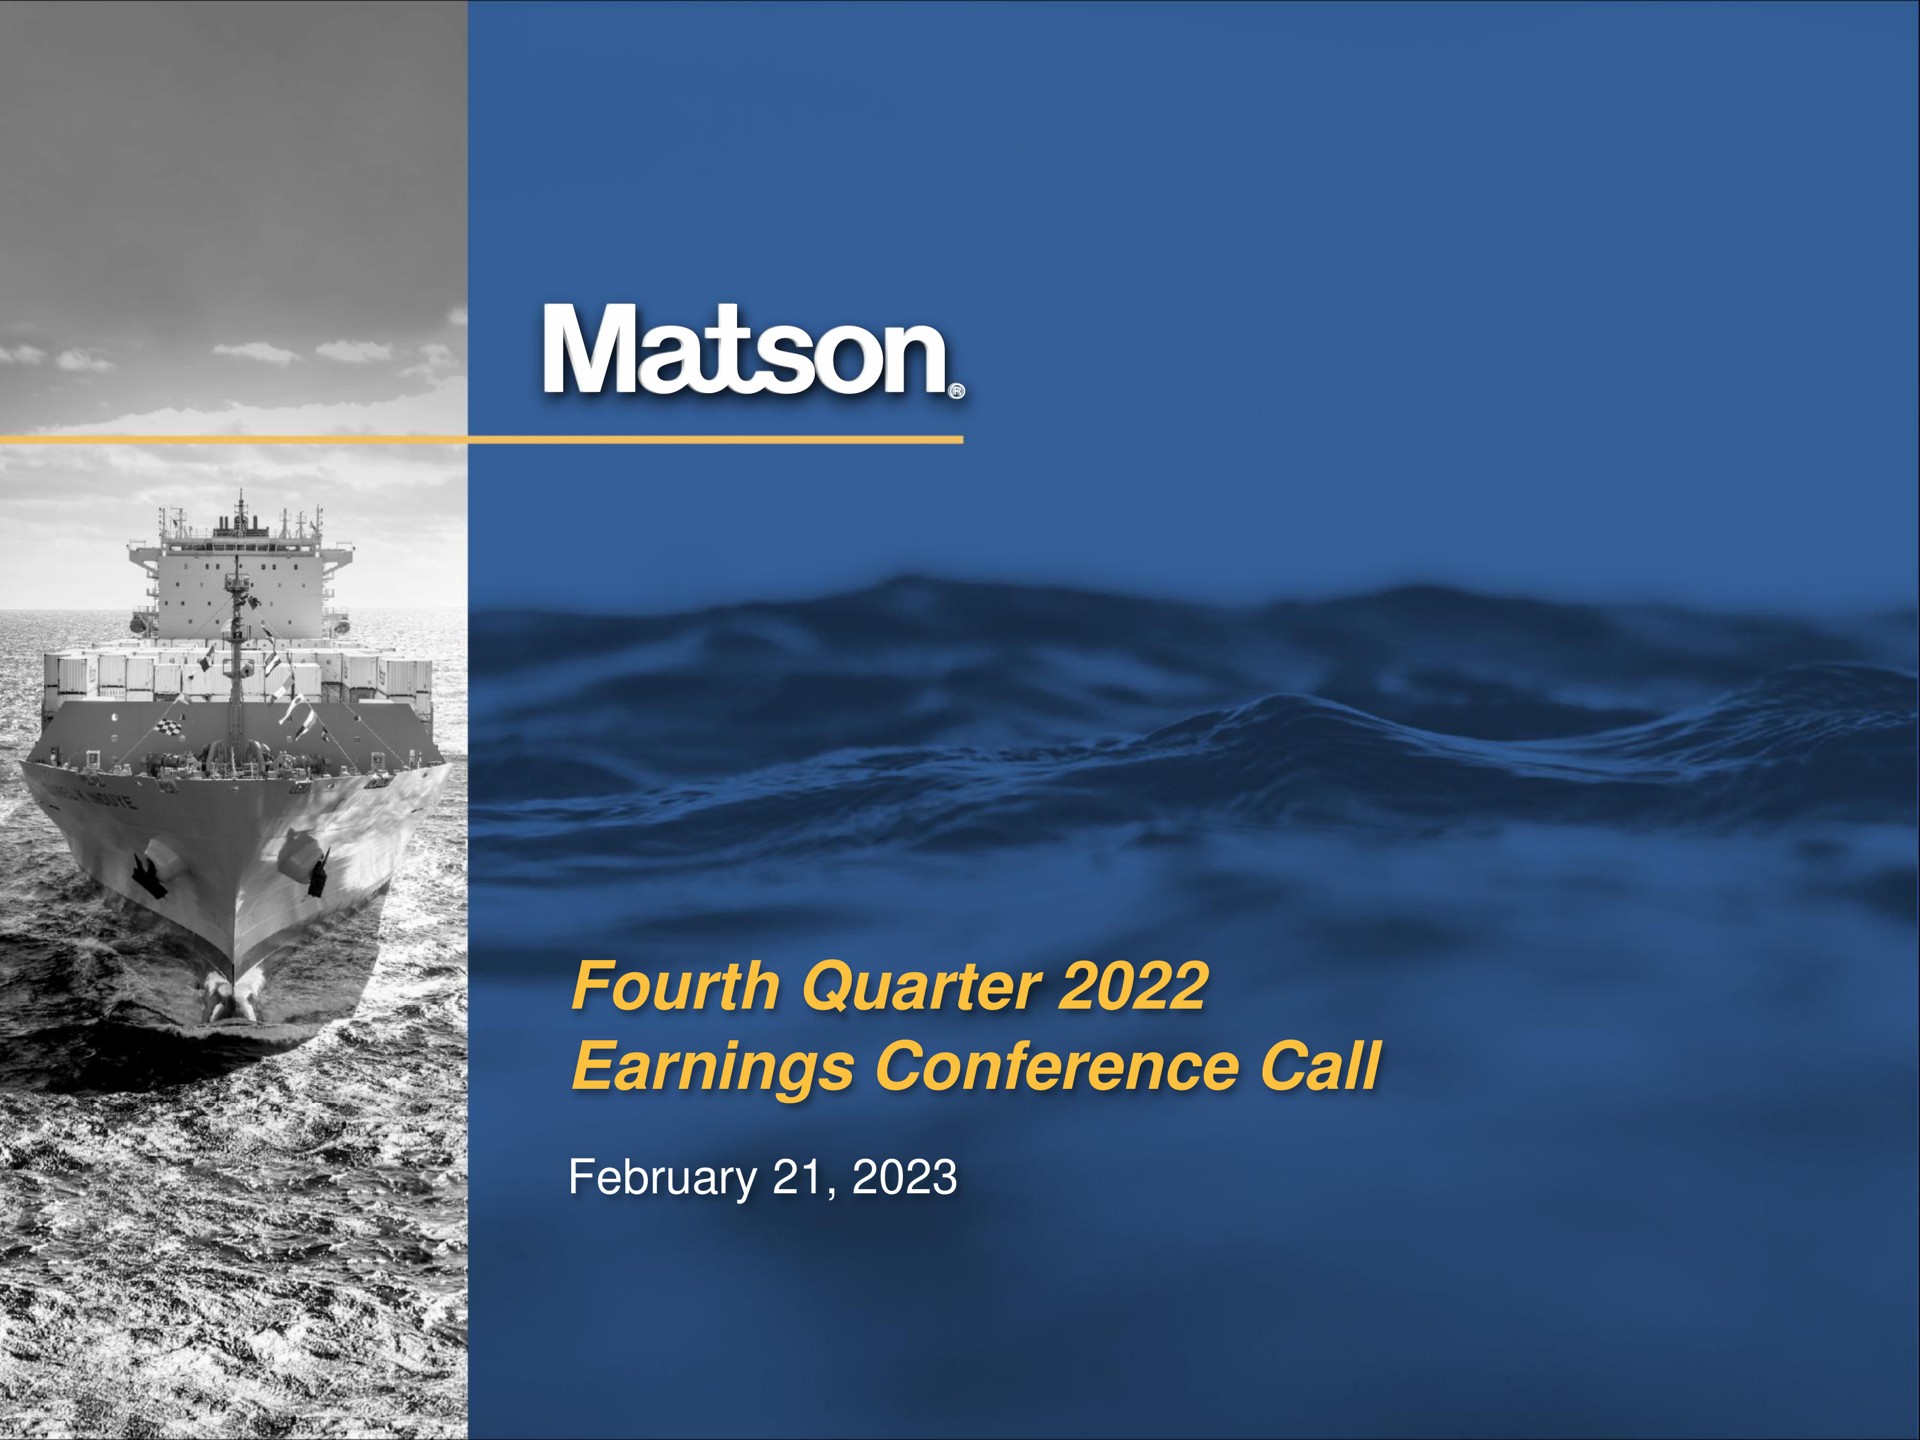 fourth quarter earnings conference call | Matson